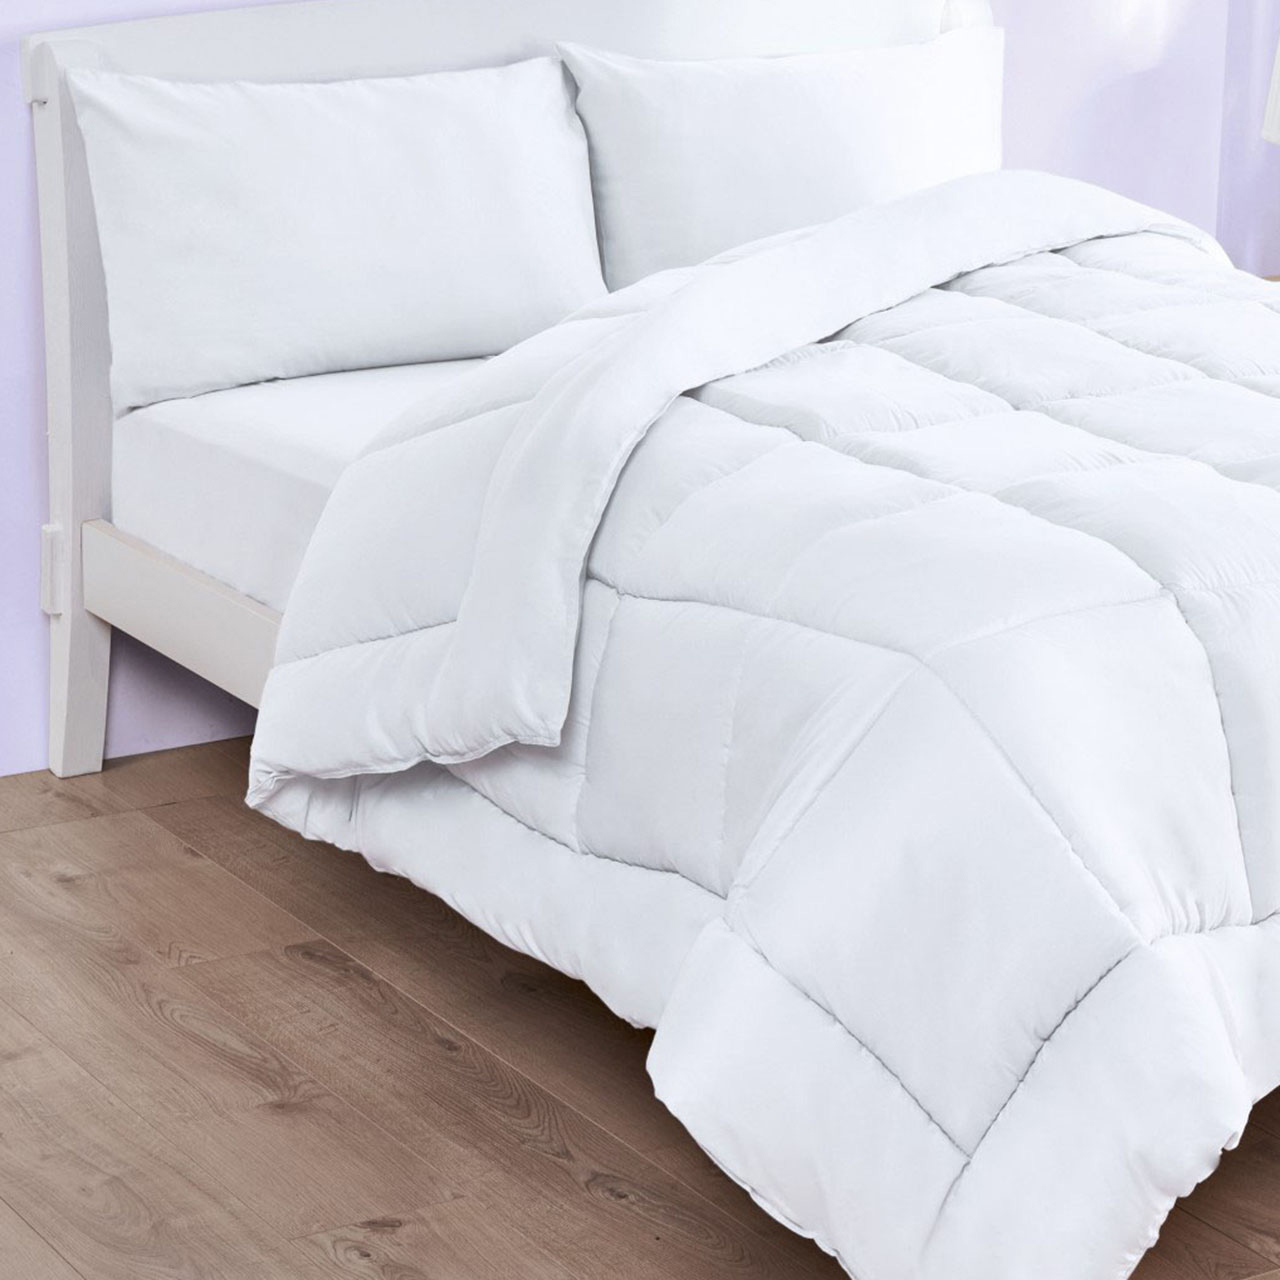 All-in-One Coverless Duvet and Bedding Bundle - 10.5 Tog